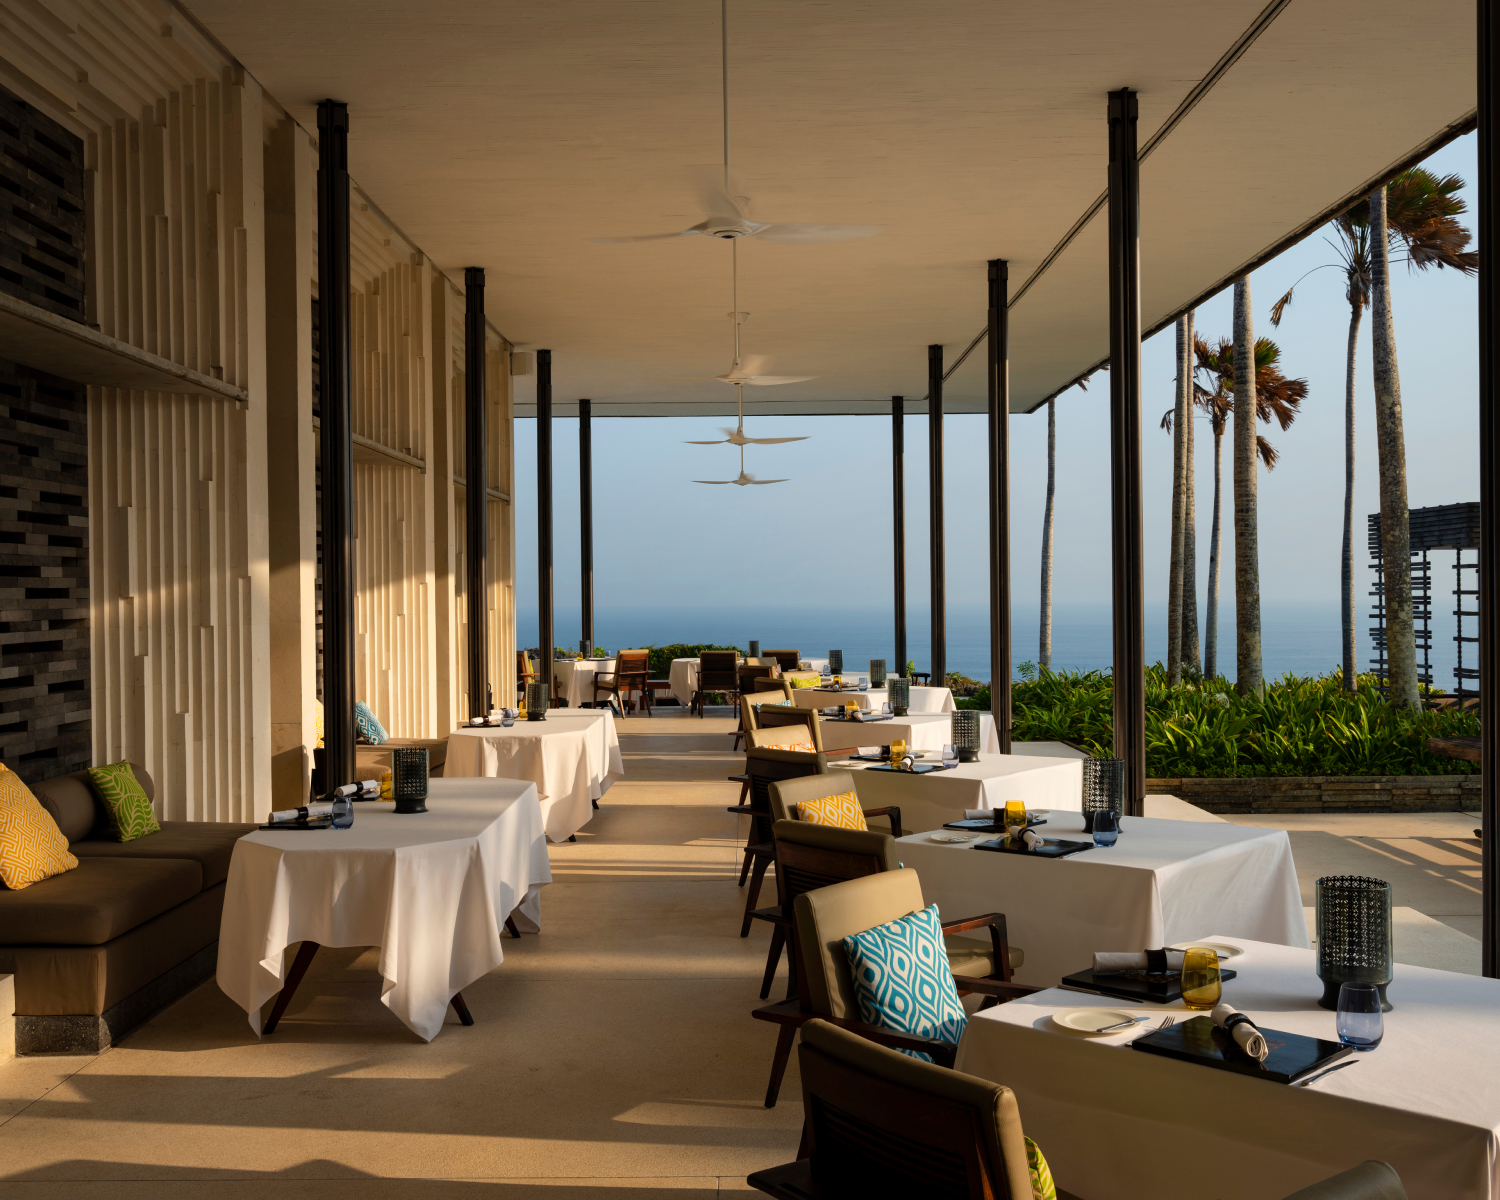 Restaurant patio with tables and chairs with ocean view in the background.